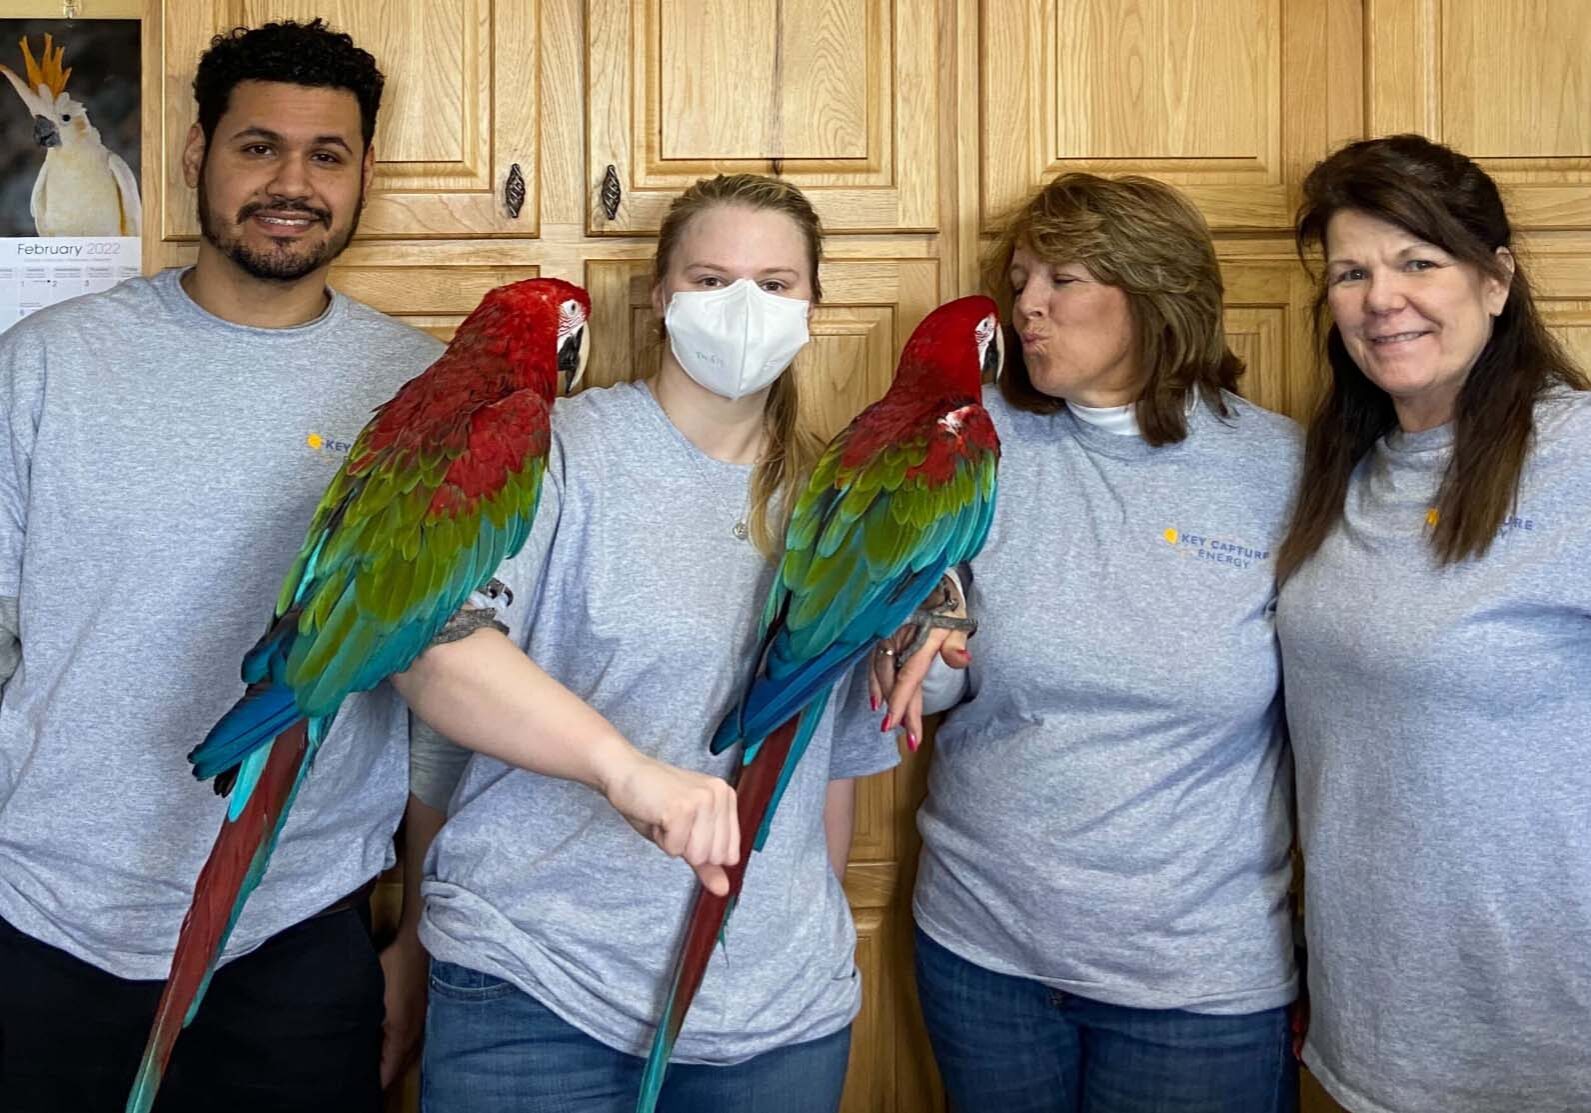 Group of employees holding parrots.